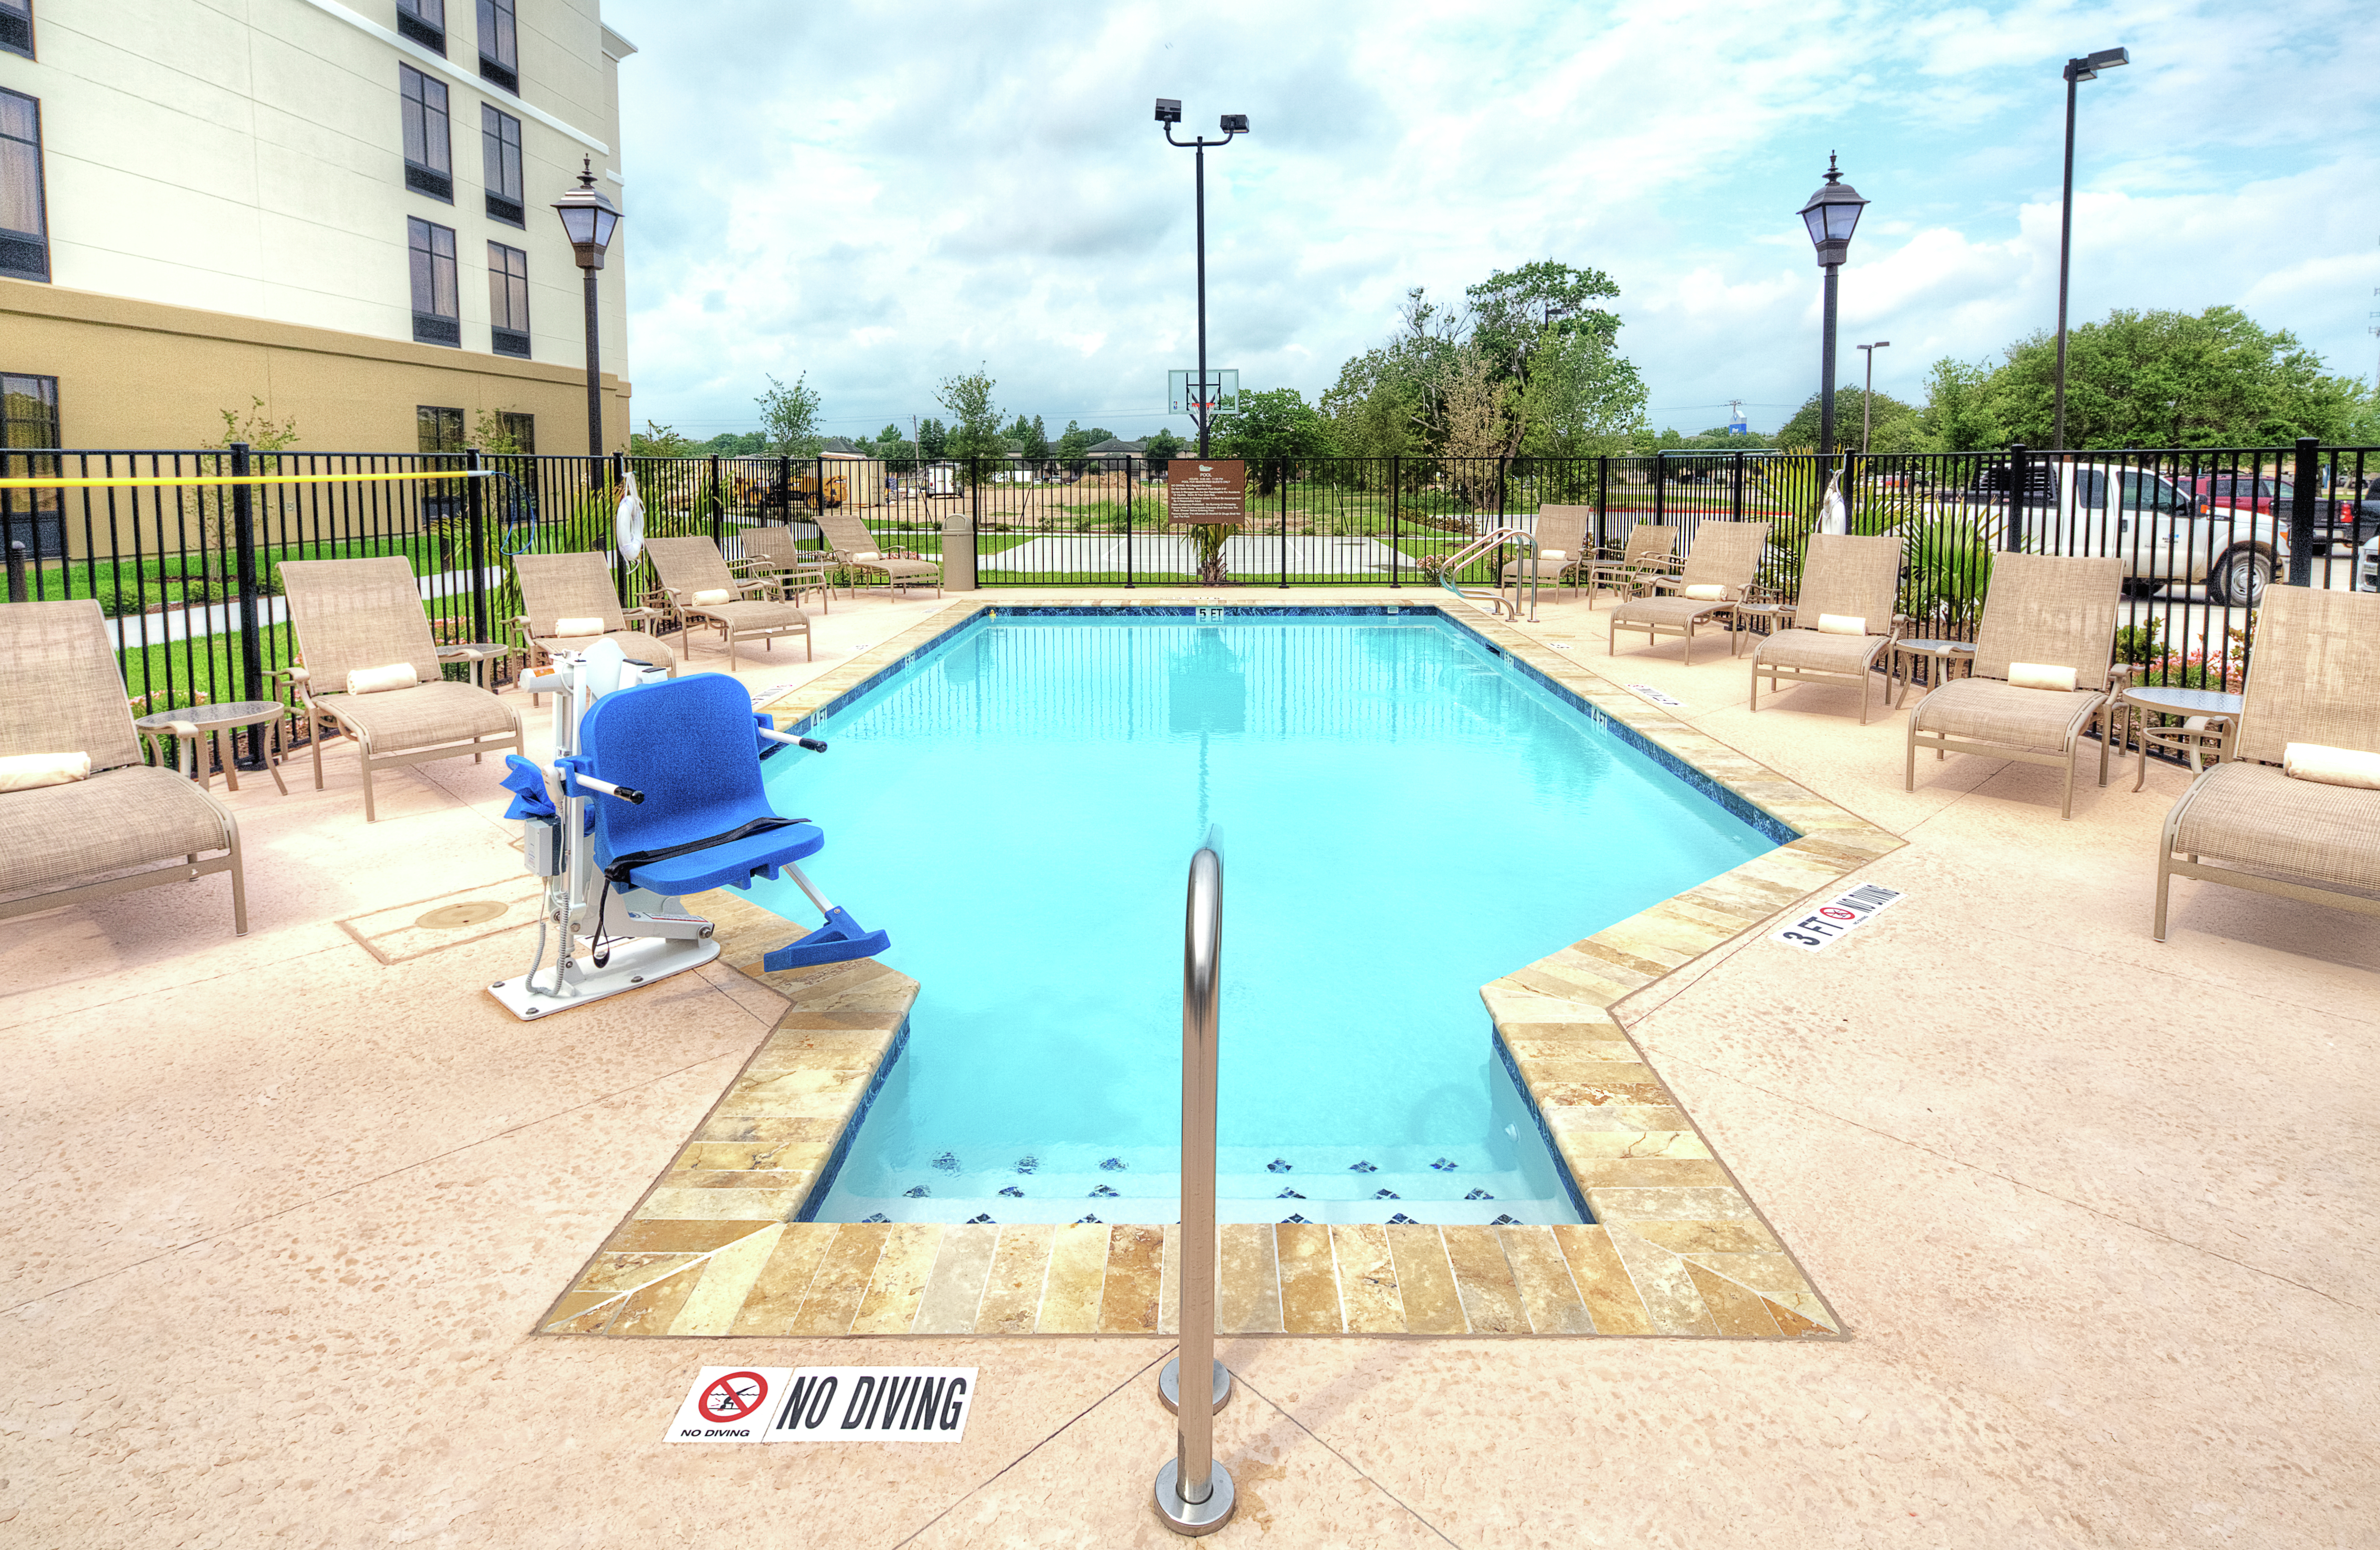 Outdoor Pool with Deck Seating